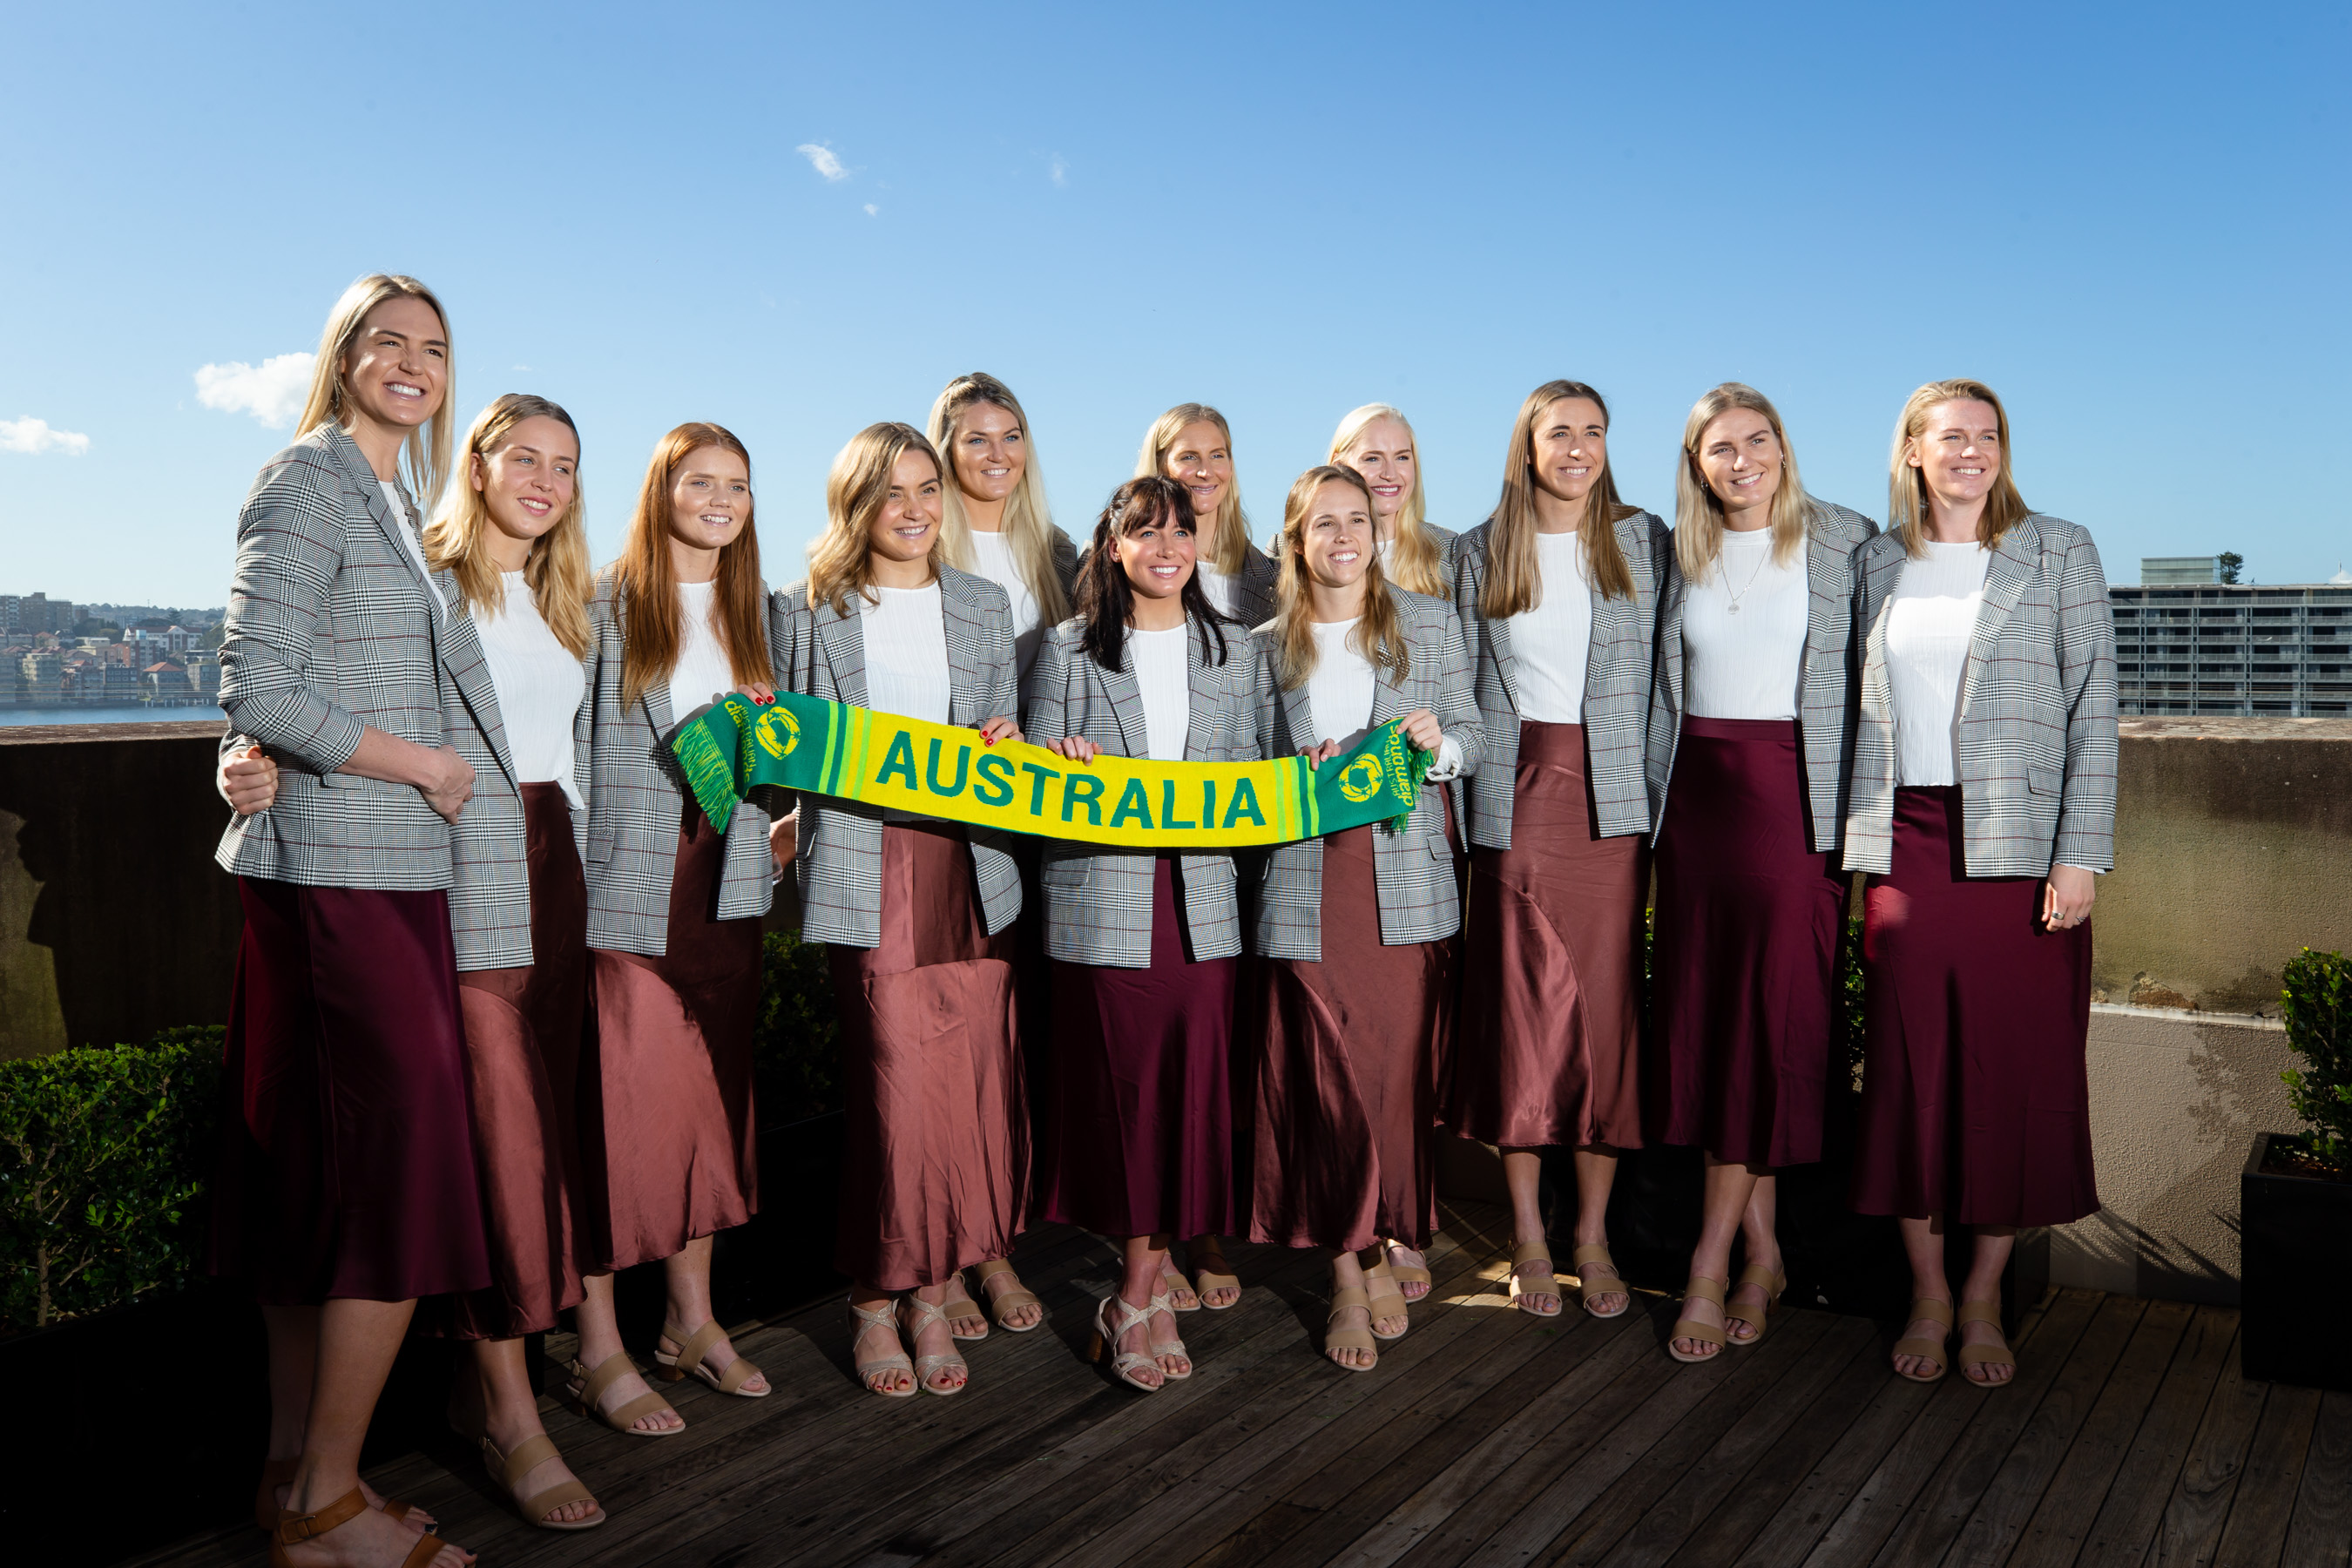 The Samsung Australian Diamonds pose for the cameras at their 2019 Netball World Cup farewell luncheon overlooking the Circular Quay in Sydney.